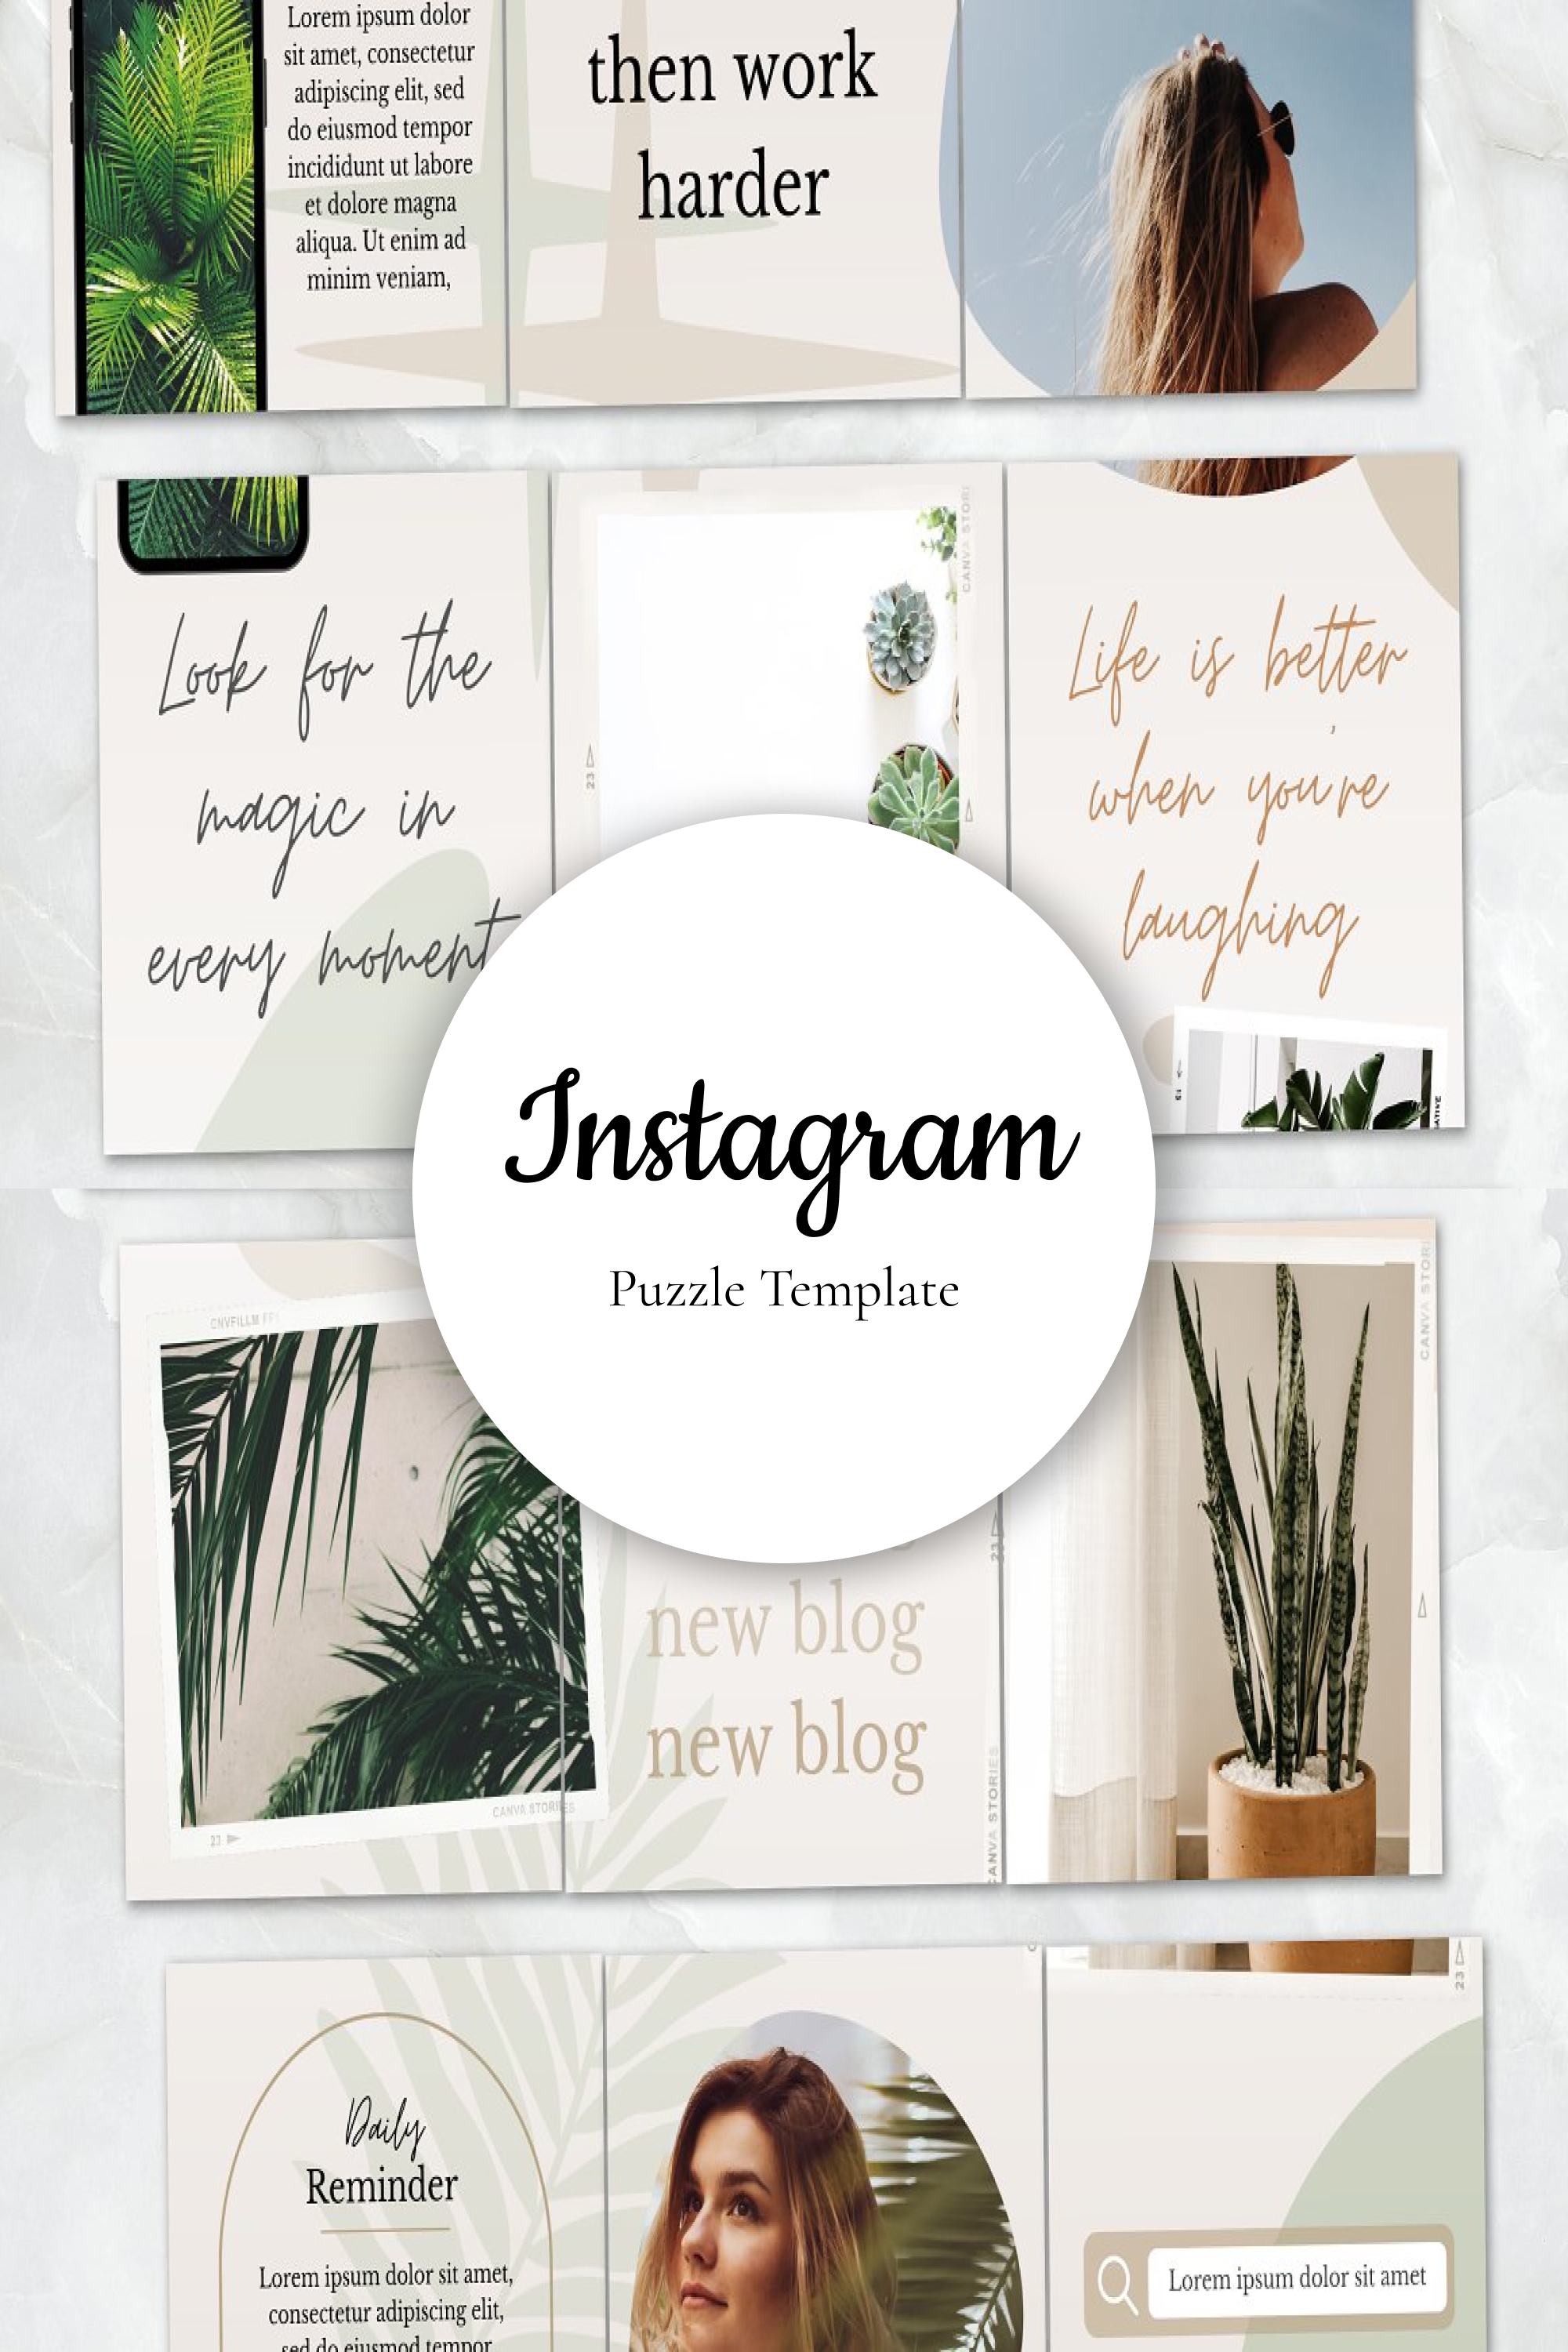 Instagram puzzle template of pinterest.